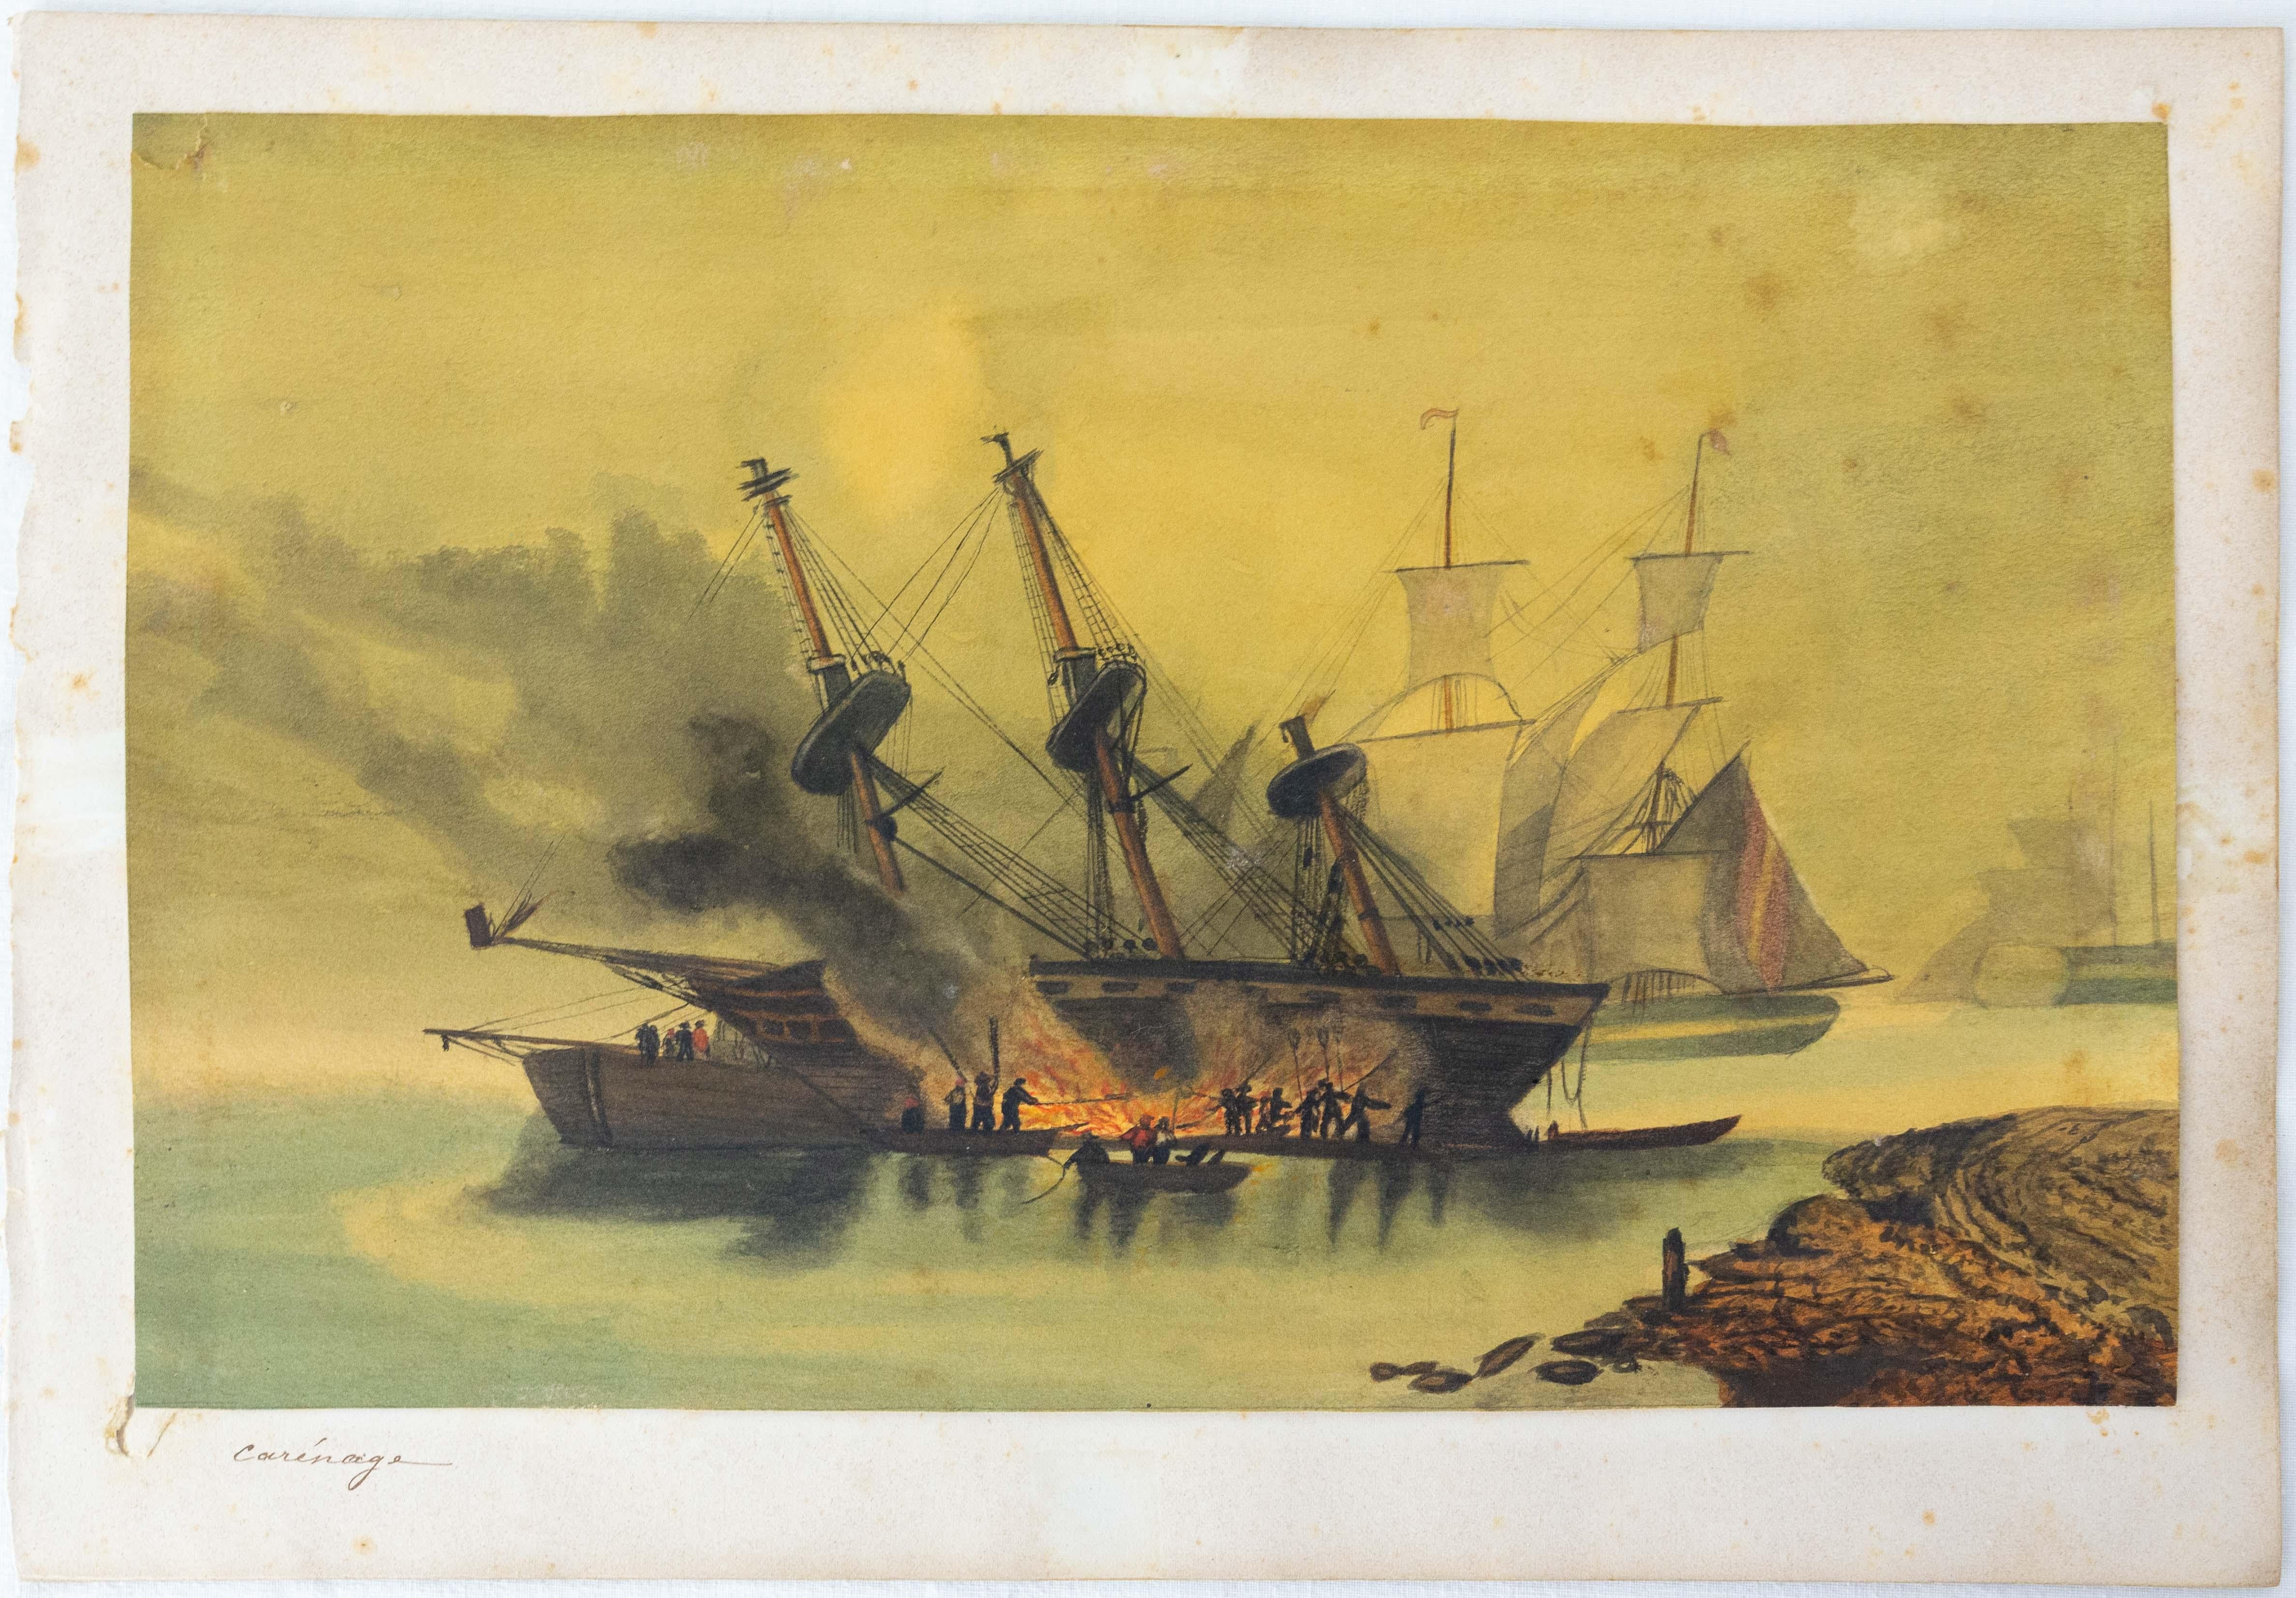 French 19th century, painting of a boat fairing.
This scene represents a boat fairing and sealing with tar by the sea. Today, as much as possible, boats are put in dry dock to carry out this kind of operation. 
For this type of boat at that time,